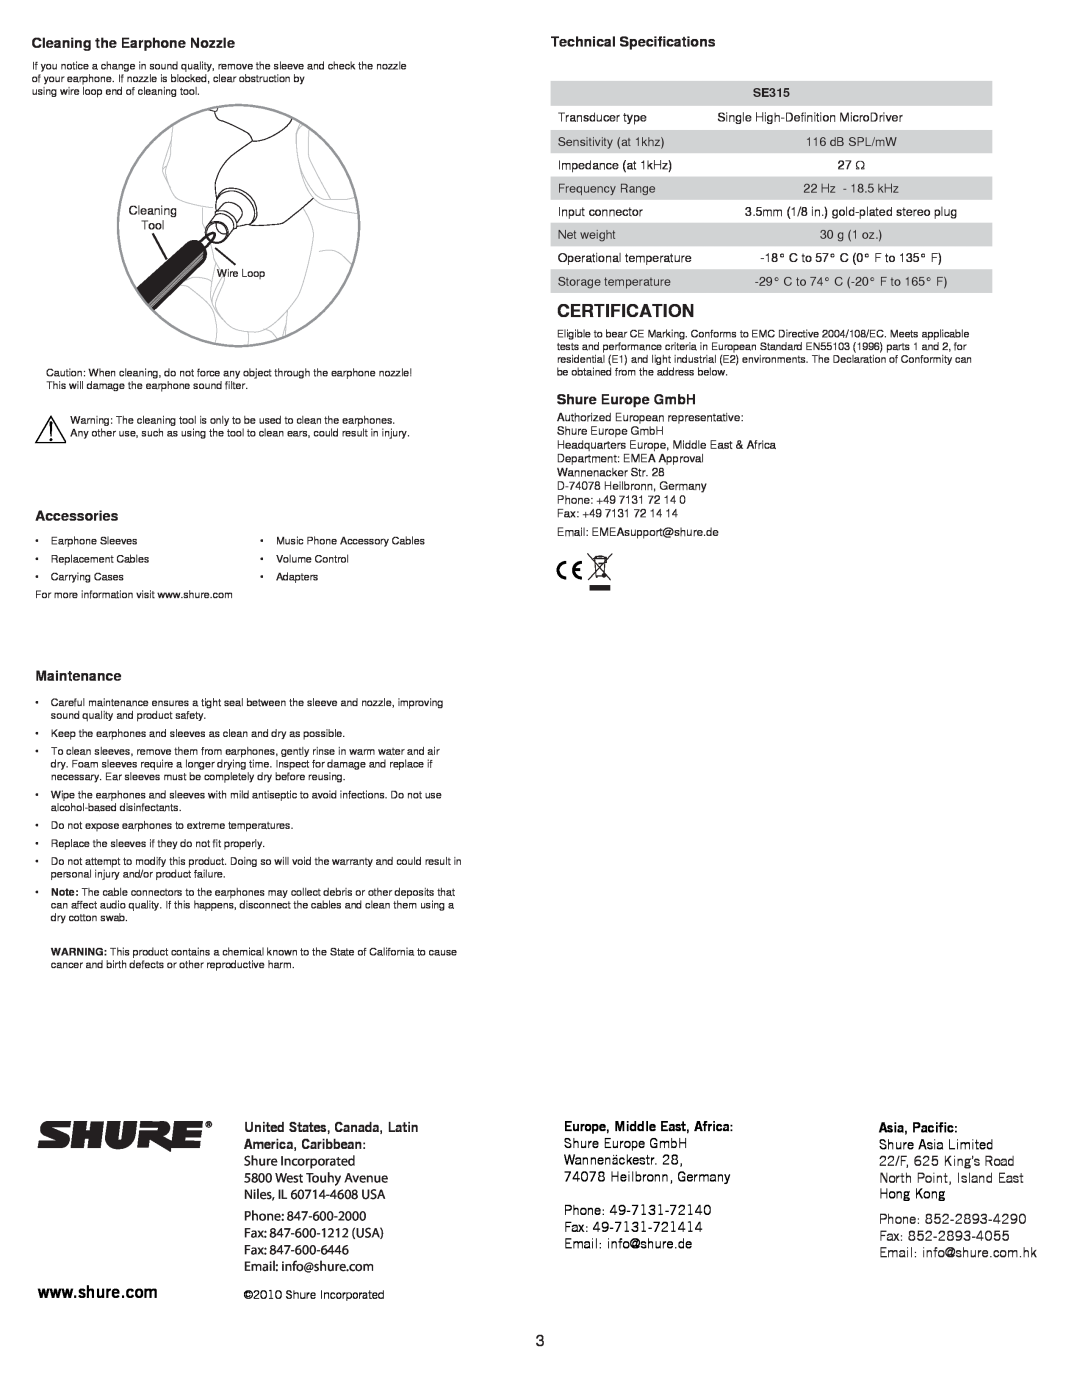 Shure se315 manual Cleaning the Earphone Nozzle, Accessories, Maintenance, Technical Specifications, Shure Europe GmbH 